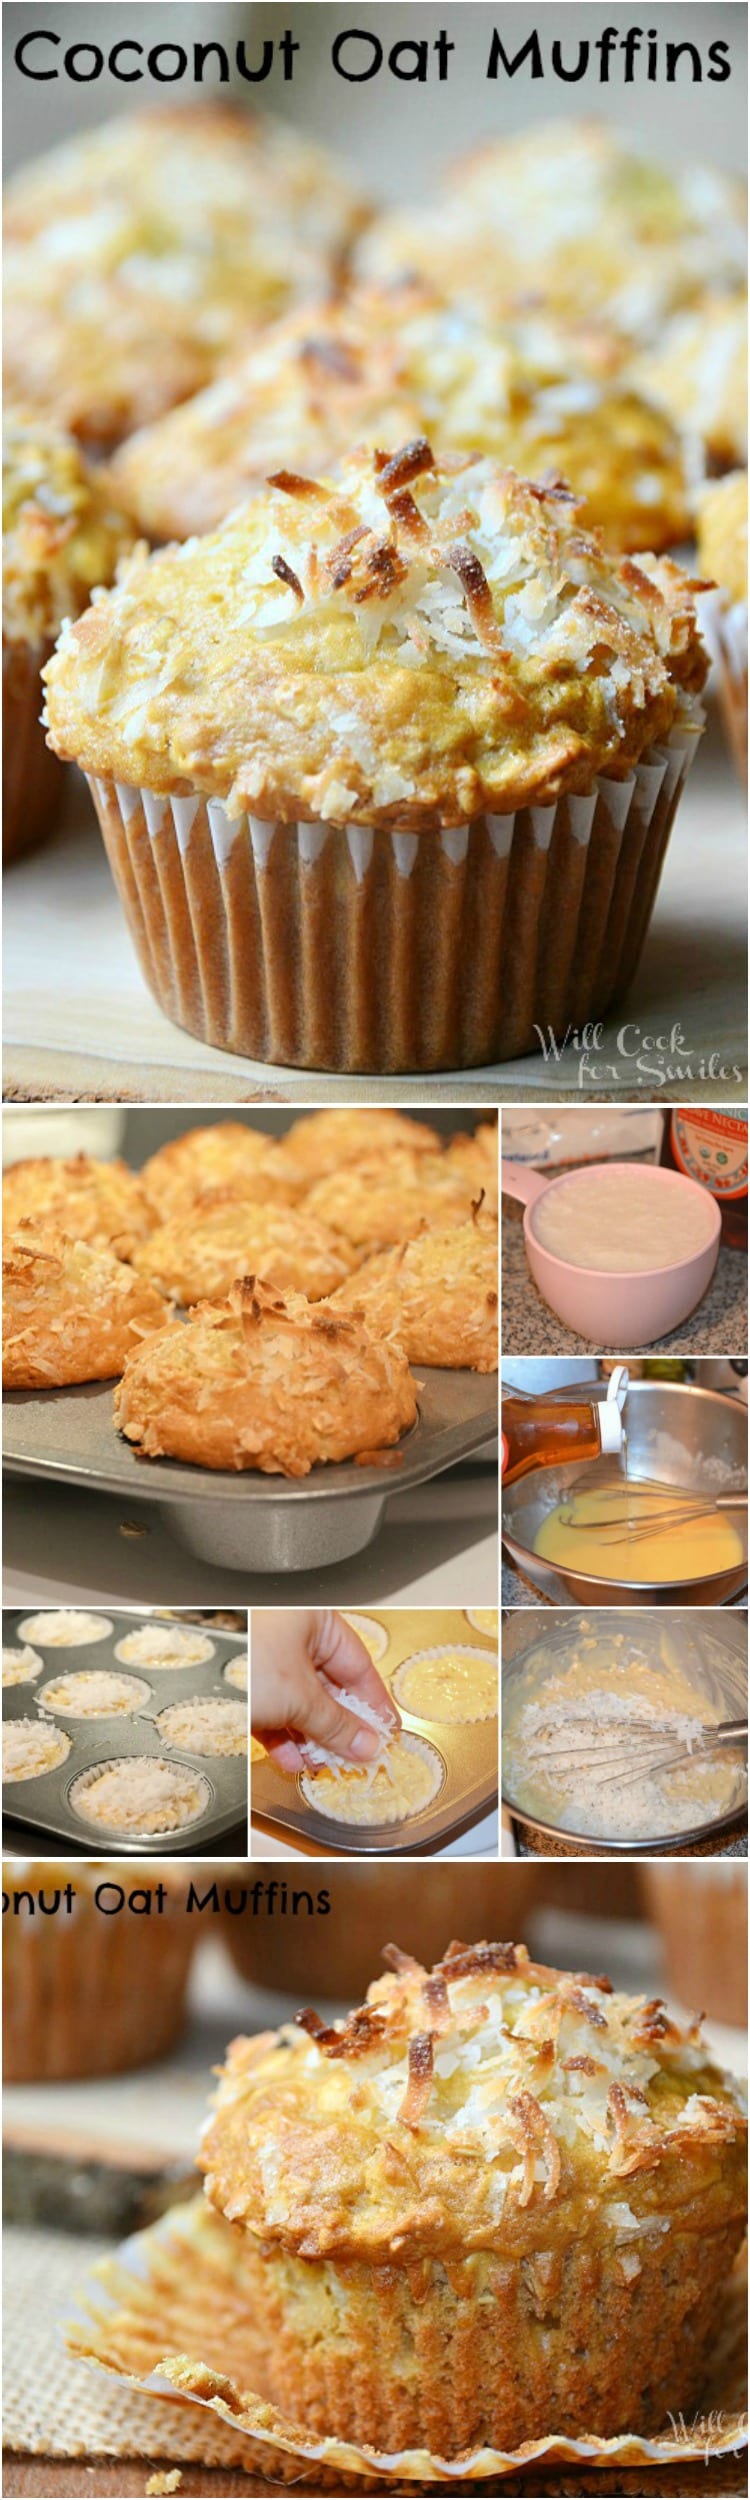 Coconut Oat Muffins collage 